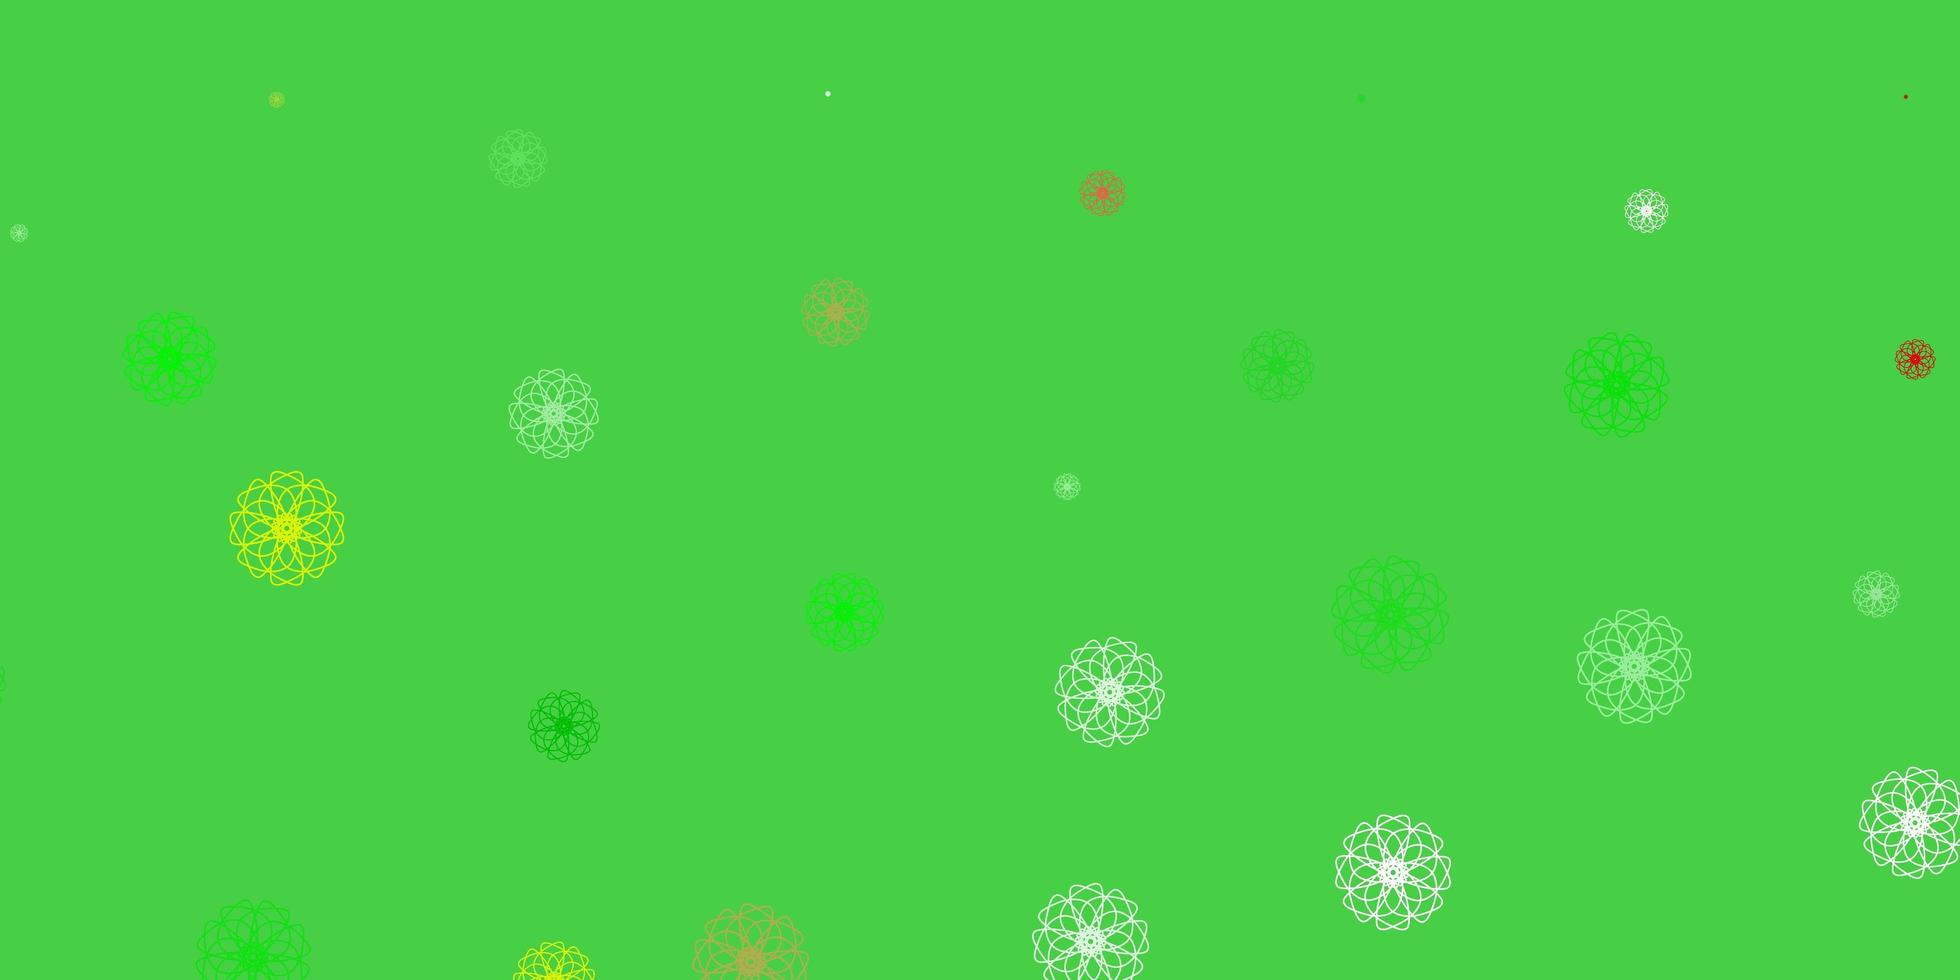 Light green, red vector doodle background with flowers.